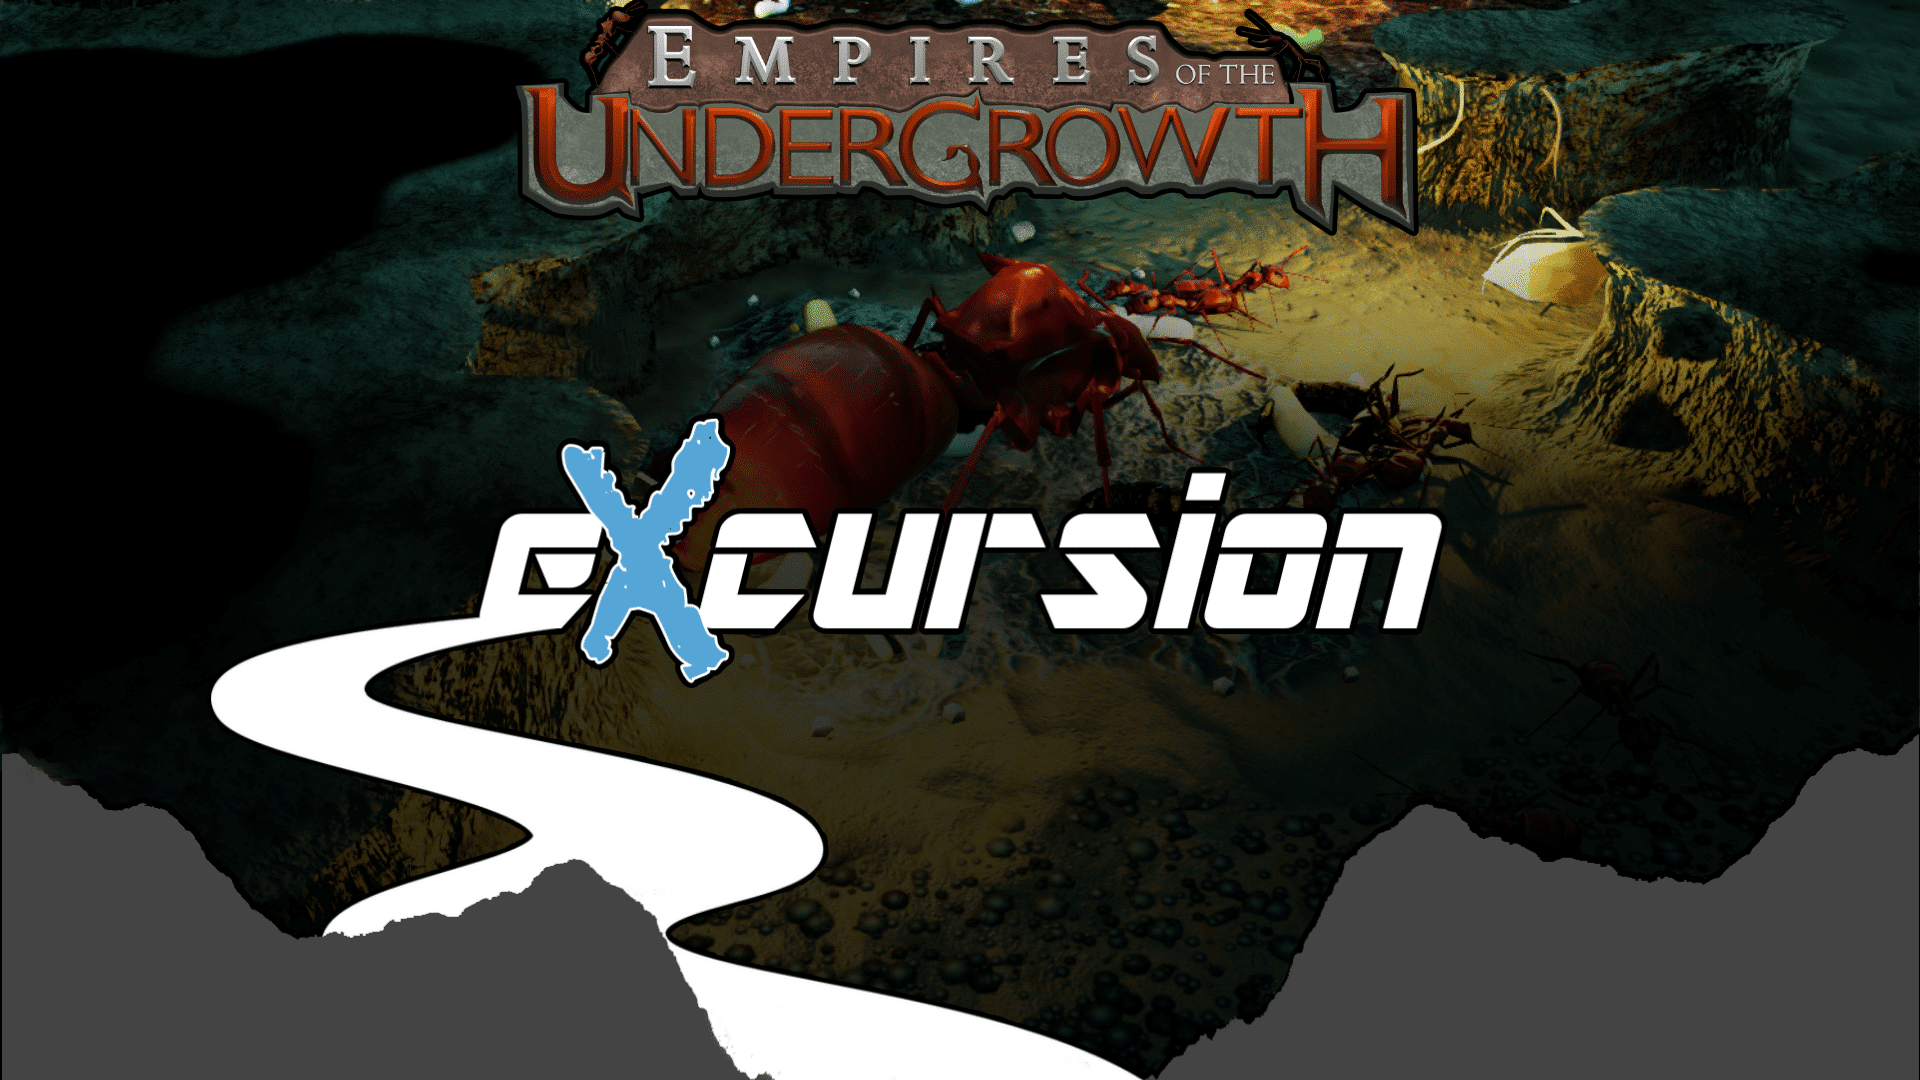 Empires of the Undergrowth eXcursion